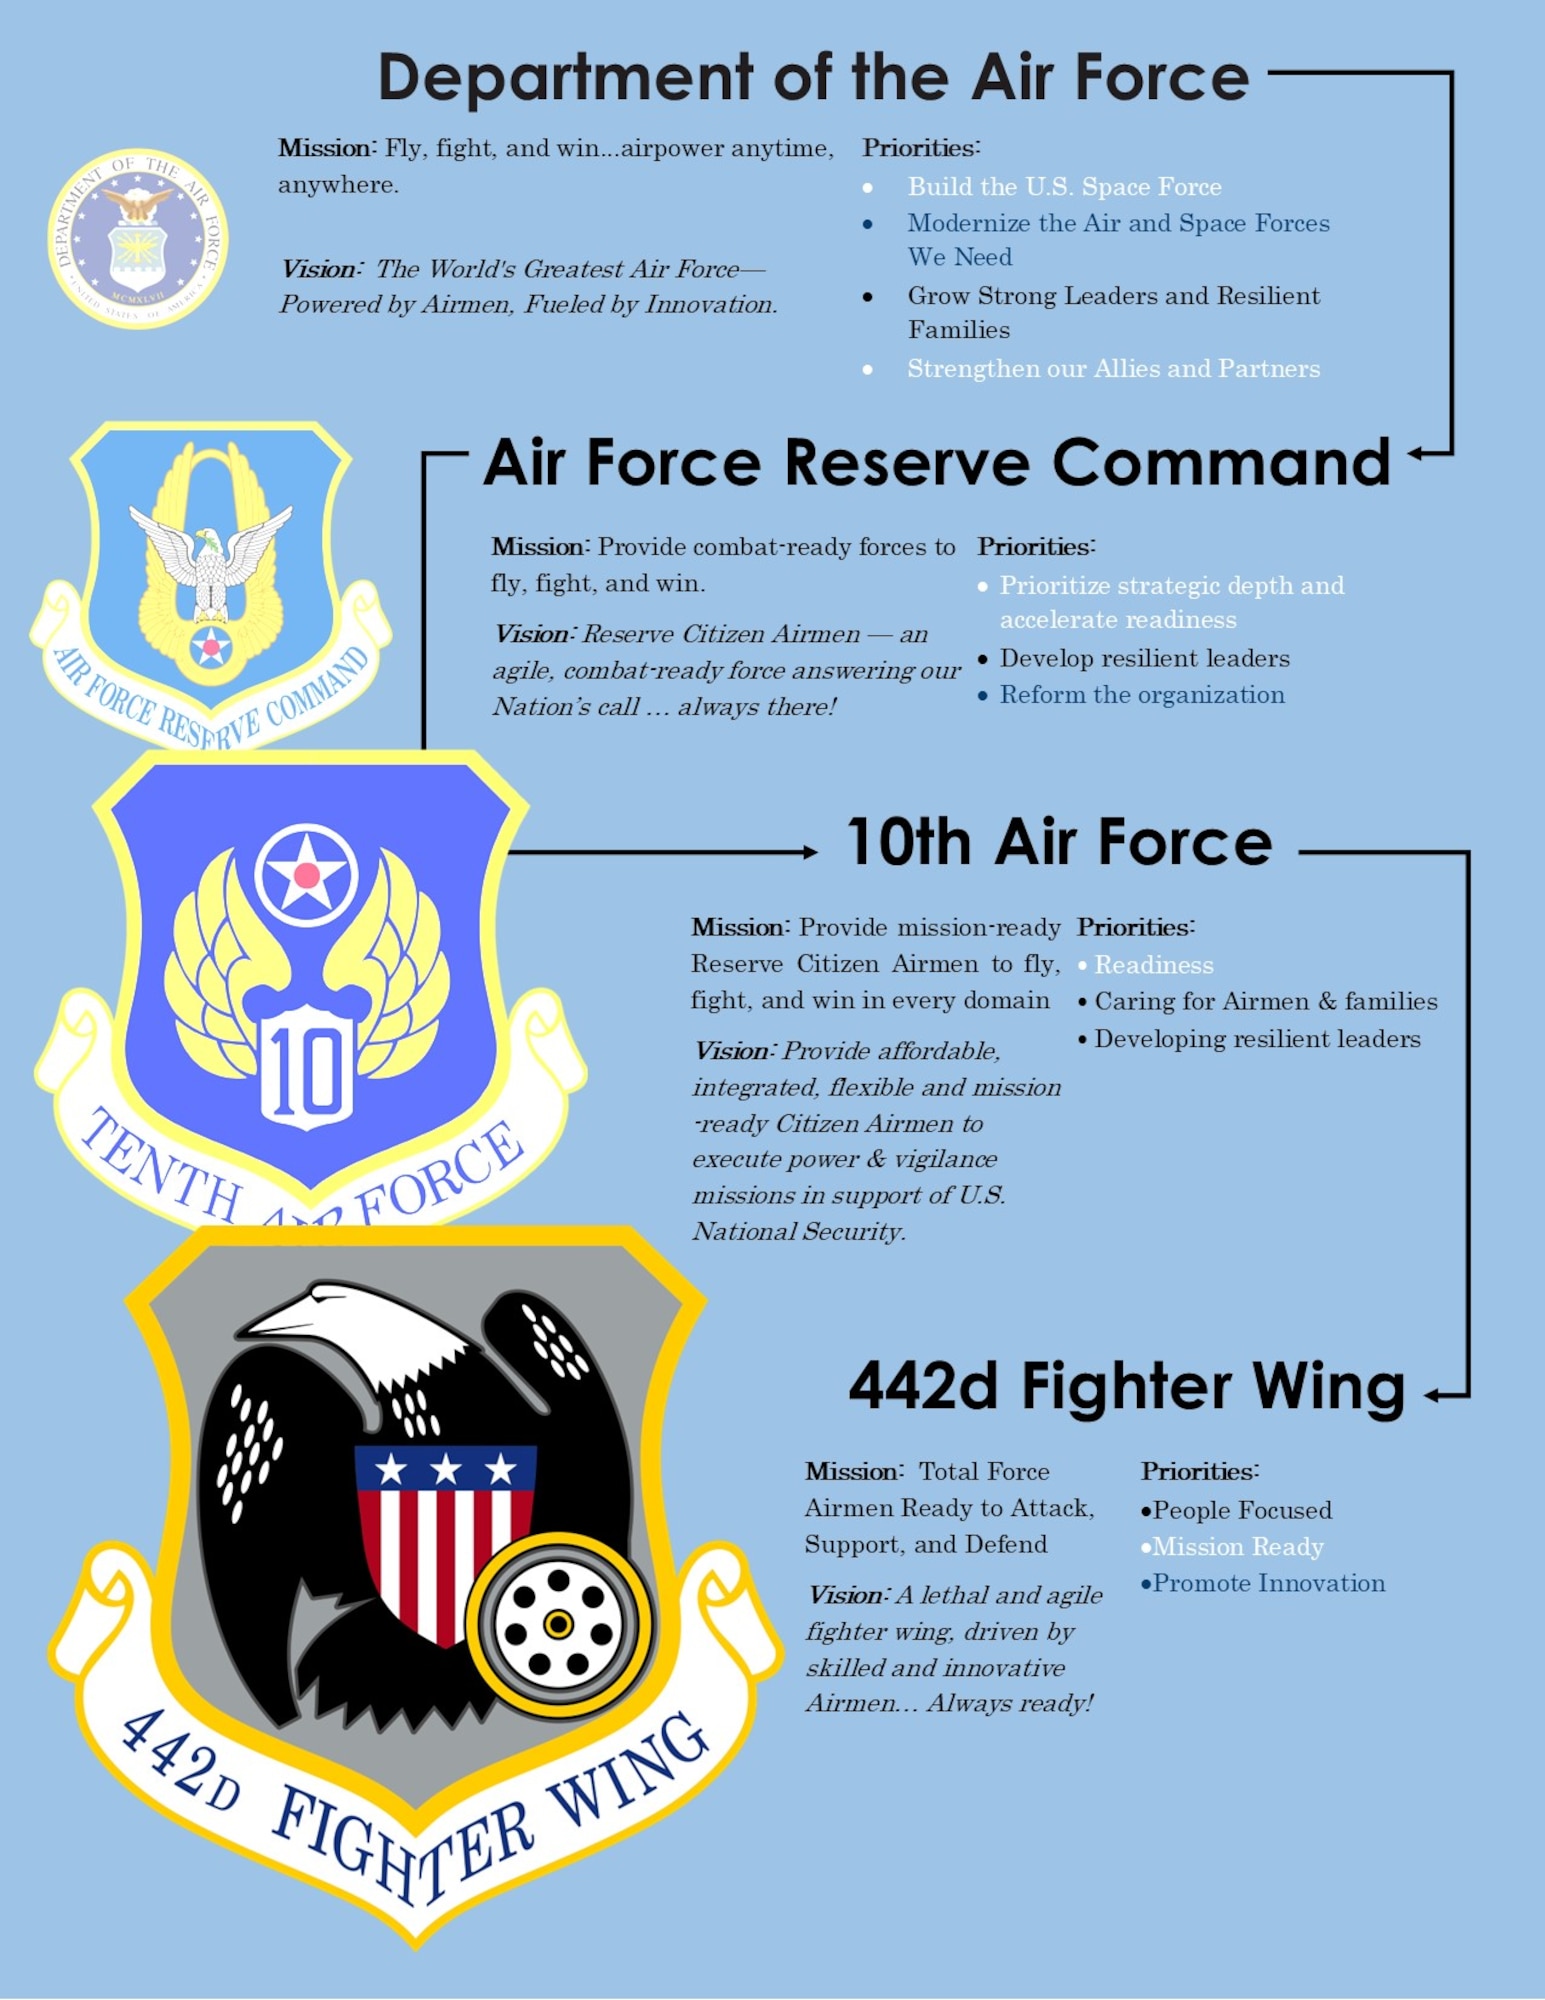 The Mission, Vision, and Priorities statement for the 442d Fighter Wing for 2022. Mission: Total Force Airmen Ready to Attack, Support, and Defend. Vision: A Lethal and Agile Fighter Wing Driven by Skilled and Innovative Airmen…Always Ready! Priorities: People Focused, Mission Ready, Promote Innovation.